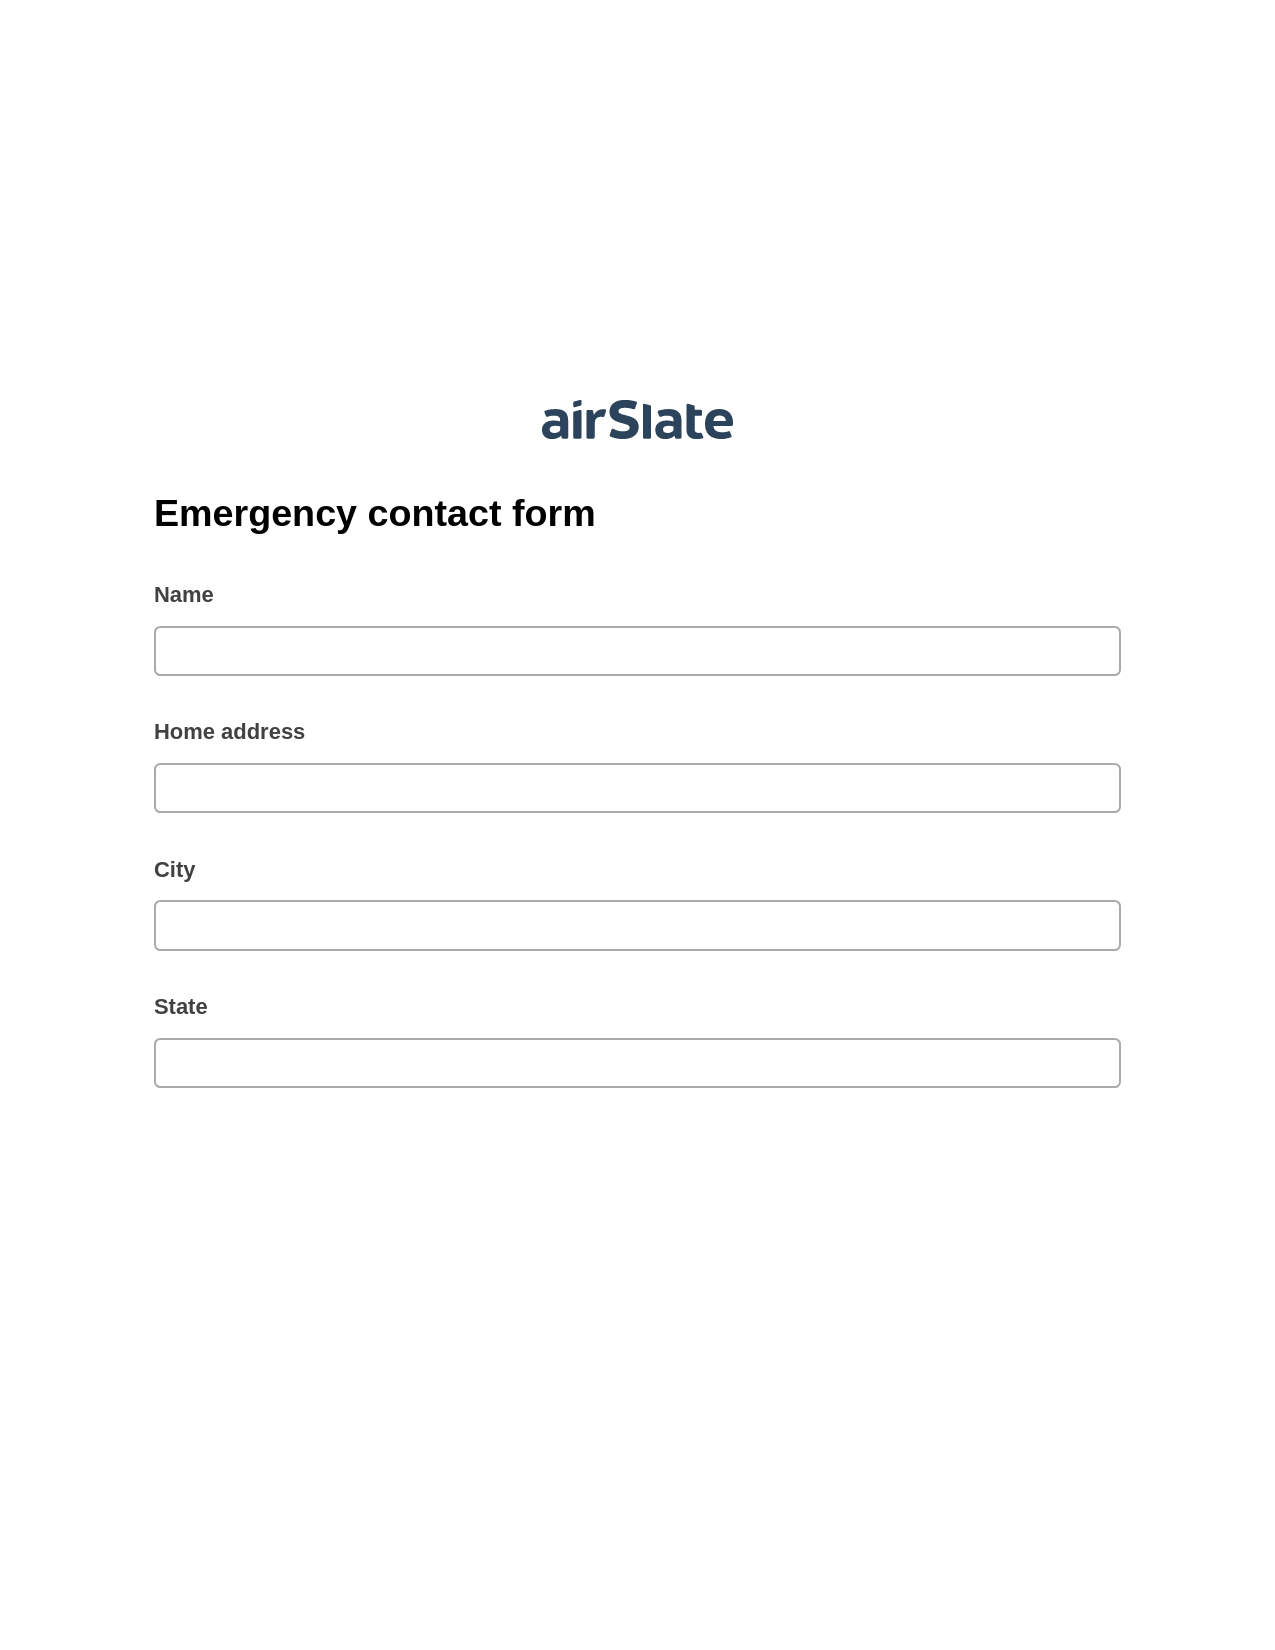 Emergency contact form Pre-fill Slate from MS Dynamics 365 Records Bot, Export to MS Dynamics 365 Bot, Slack Two-Way Binding Bot